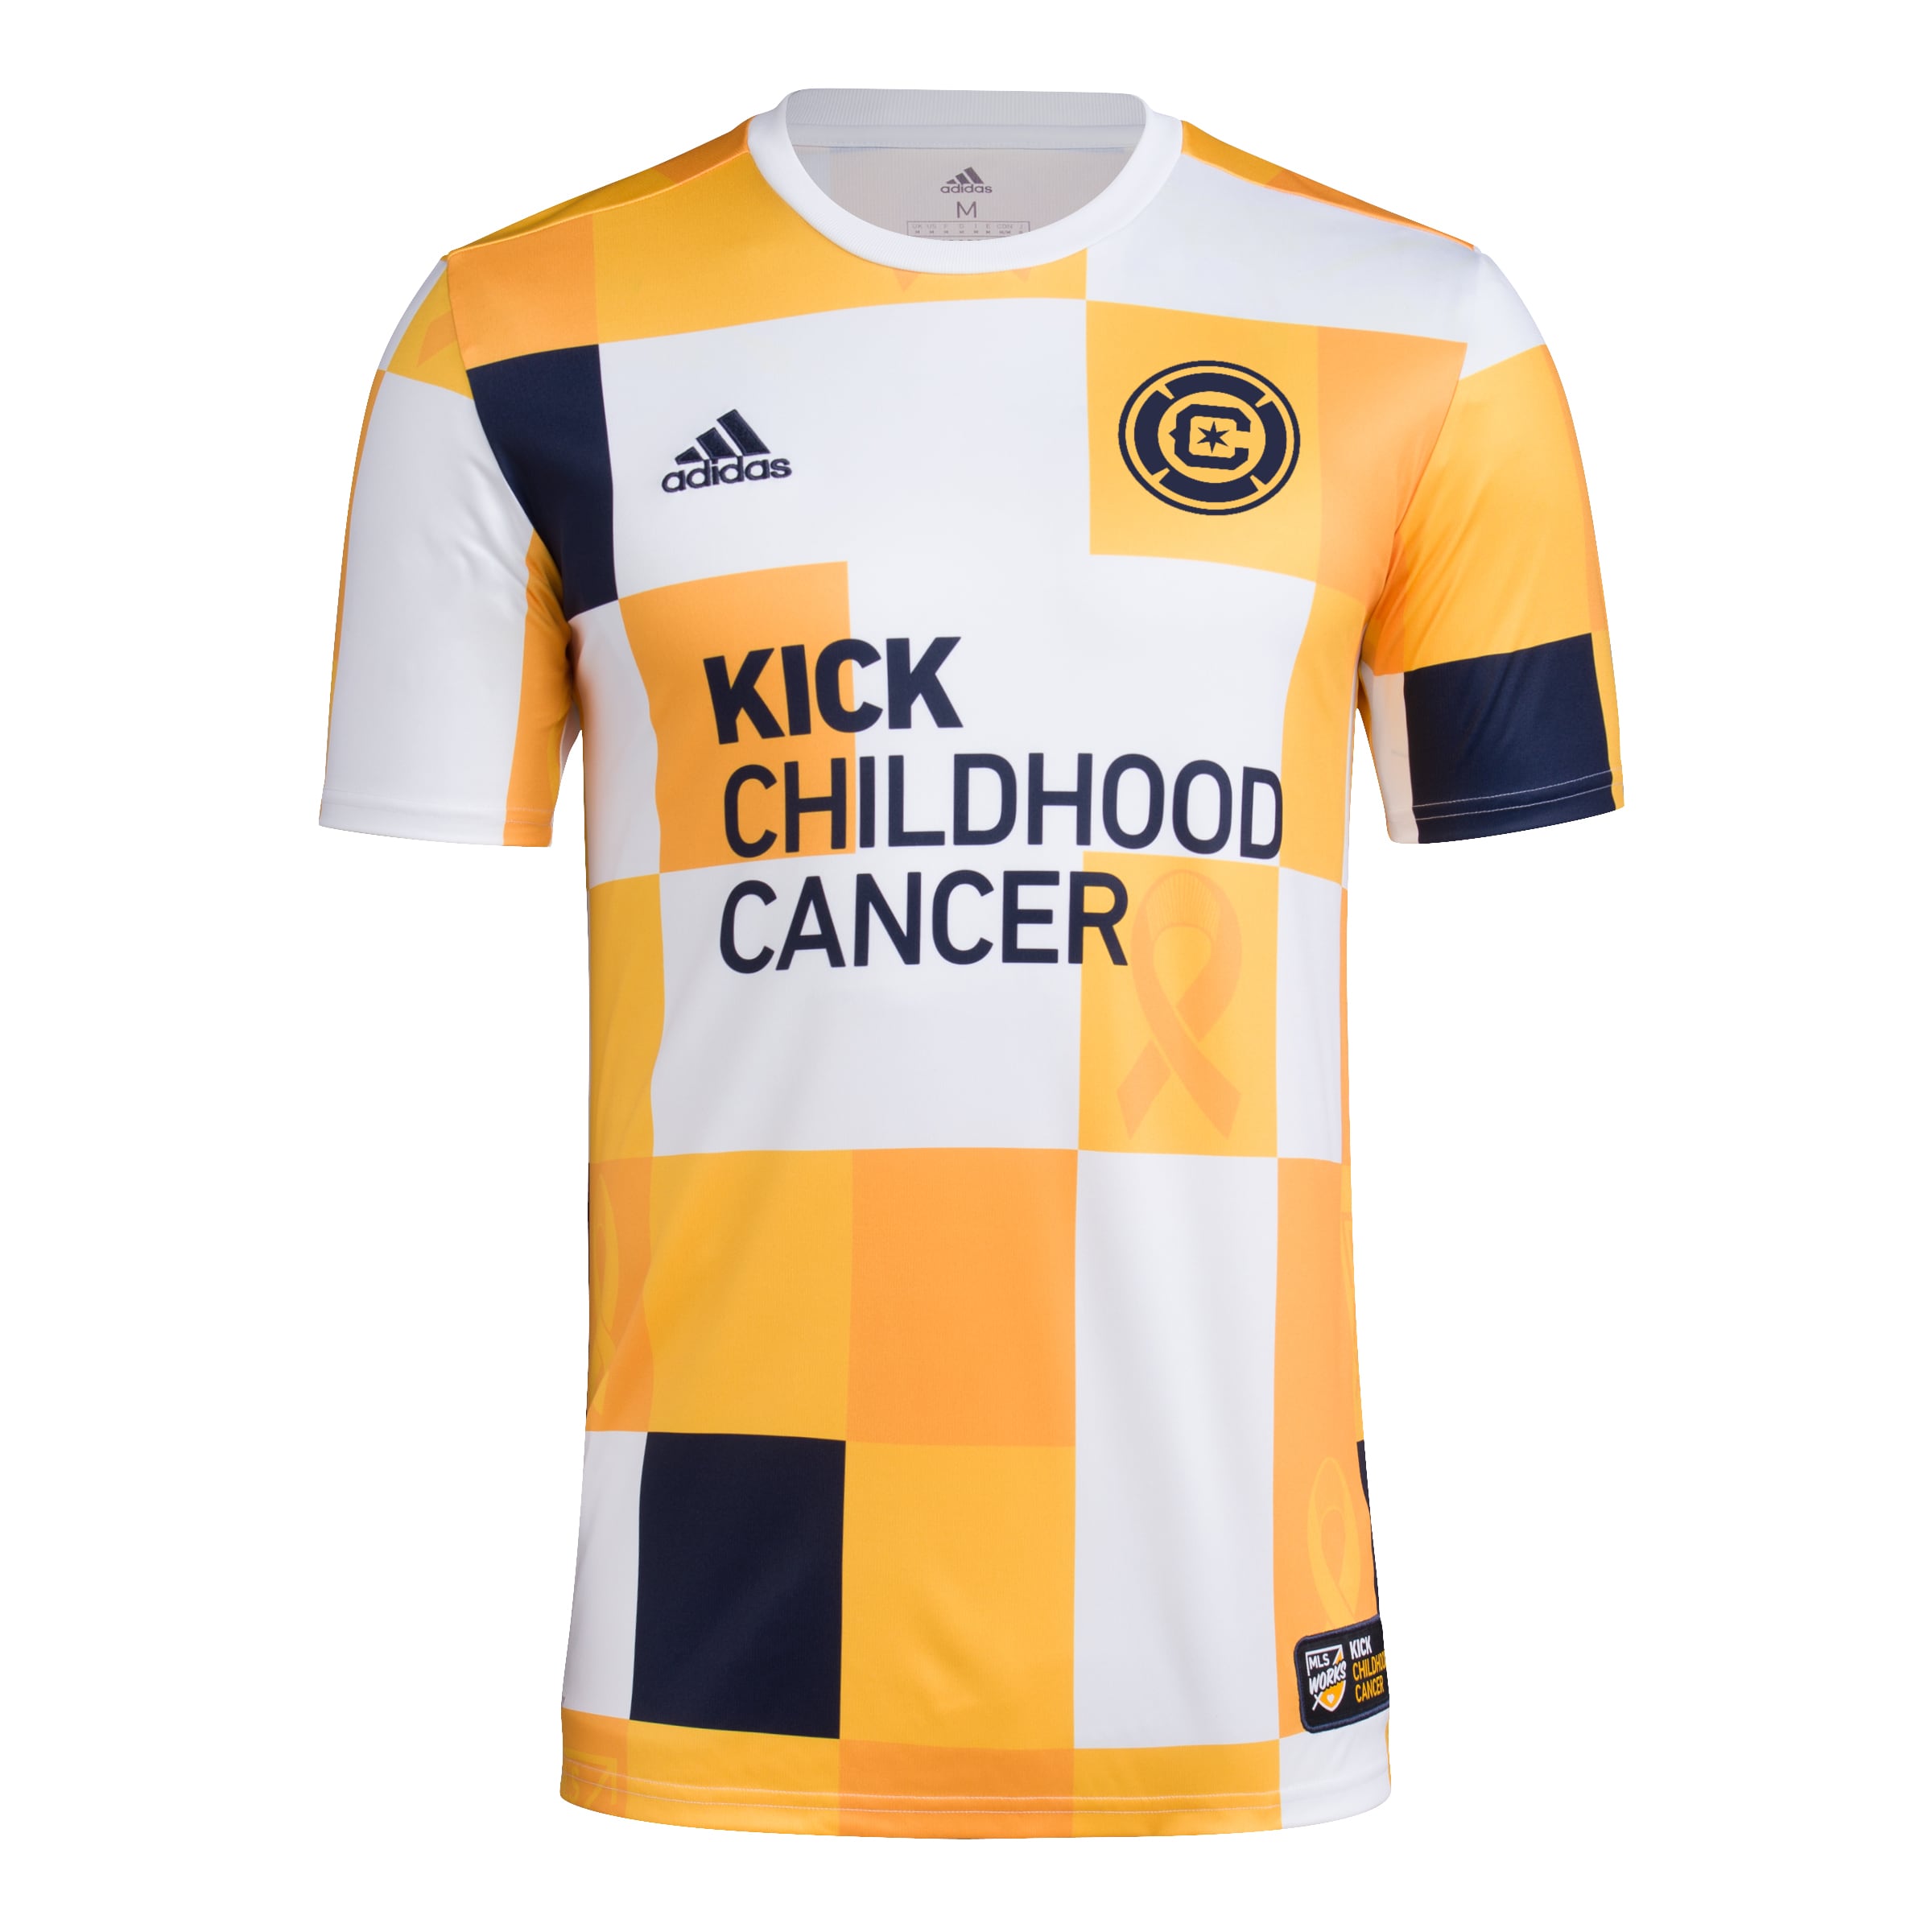 Men's Chicago Fire Jerseys White/Gold 2022 MLS Works Kick Childhood Cancer AEROREADY Pre-Match Top Style